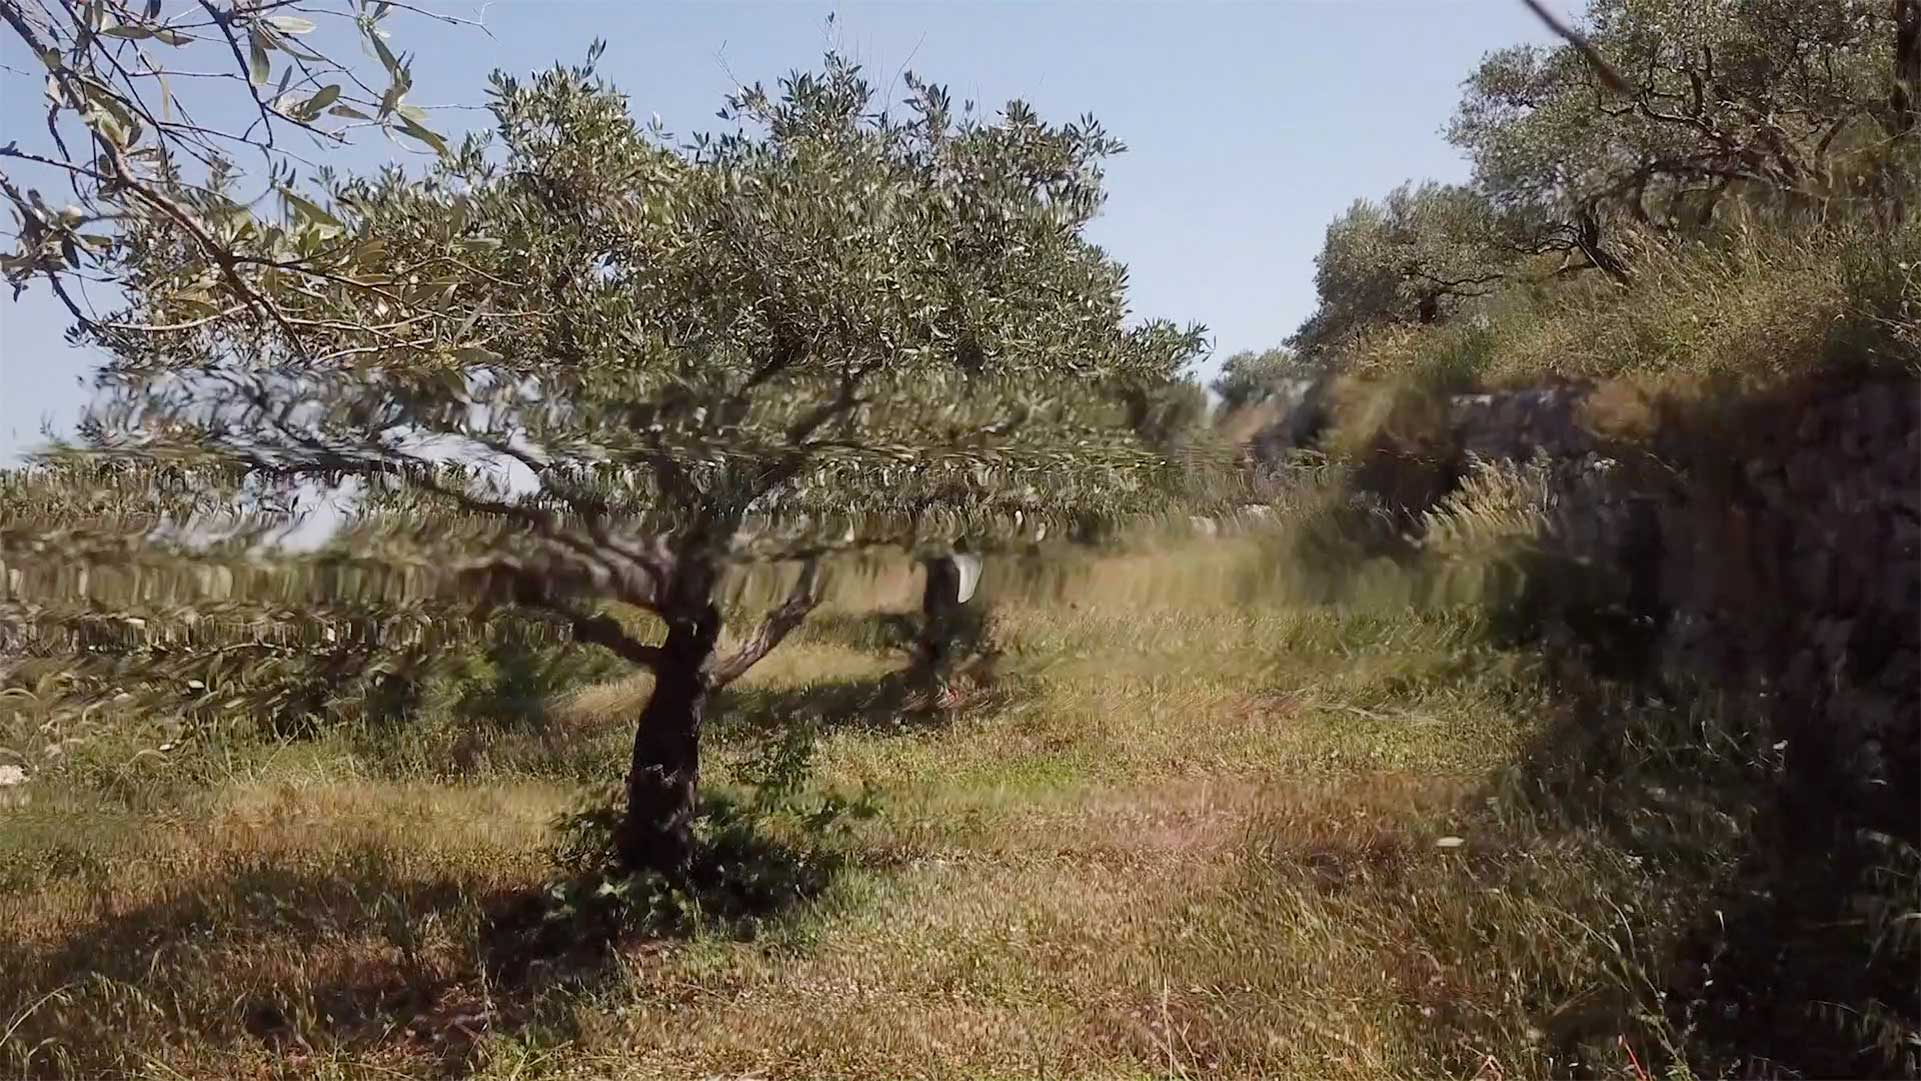 A meadow with olive trees and a wall on the right side.